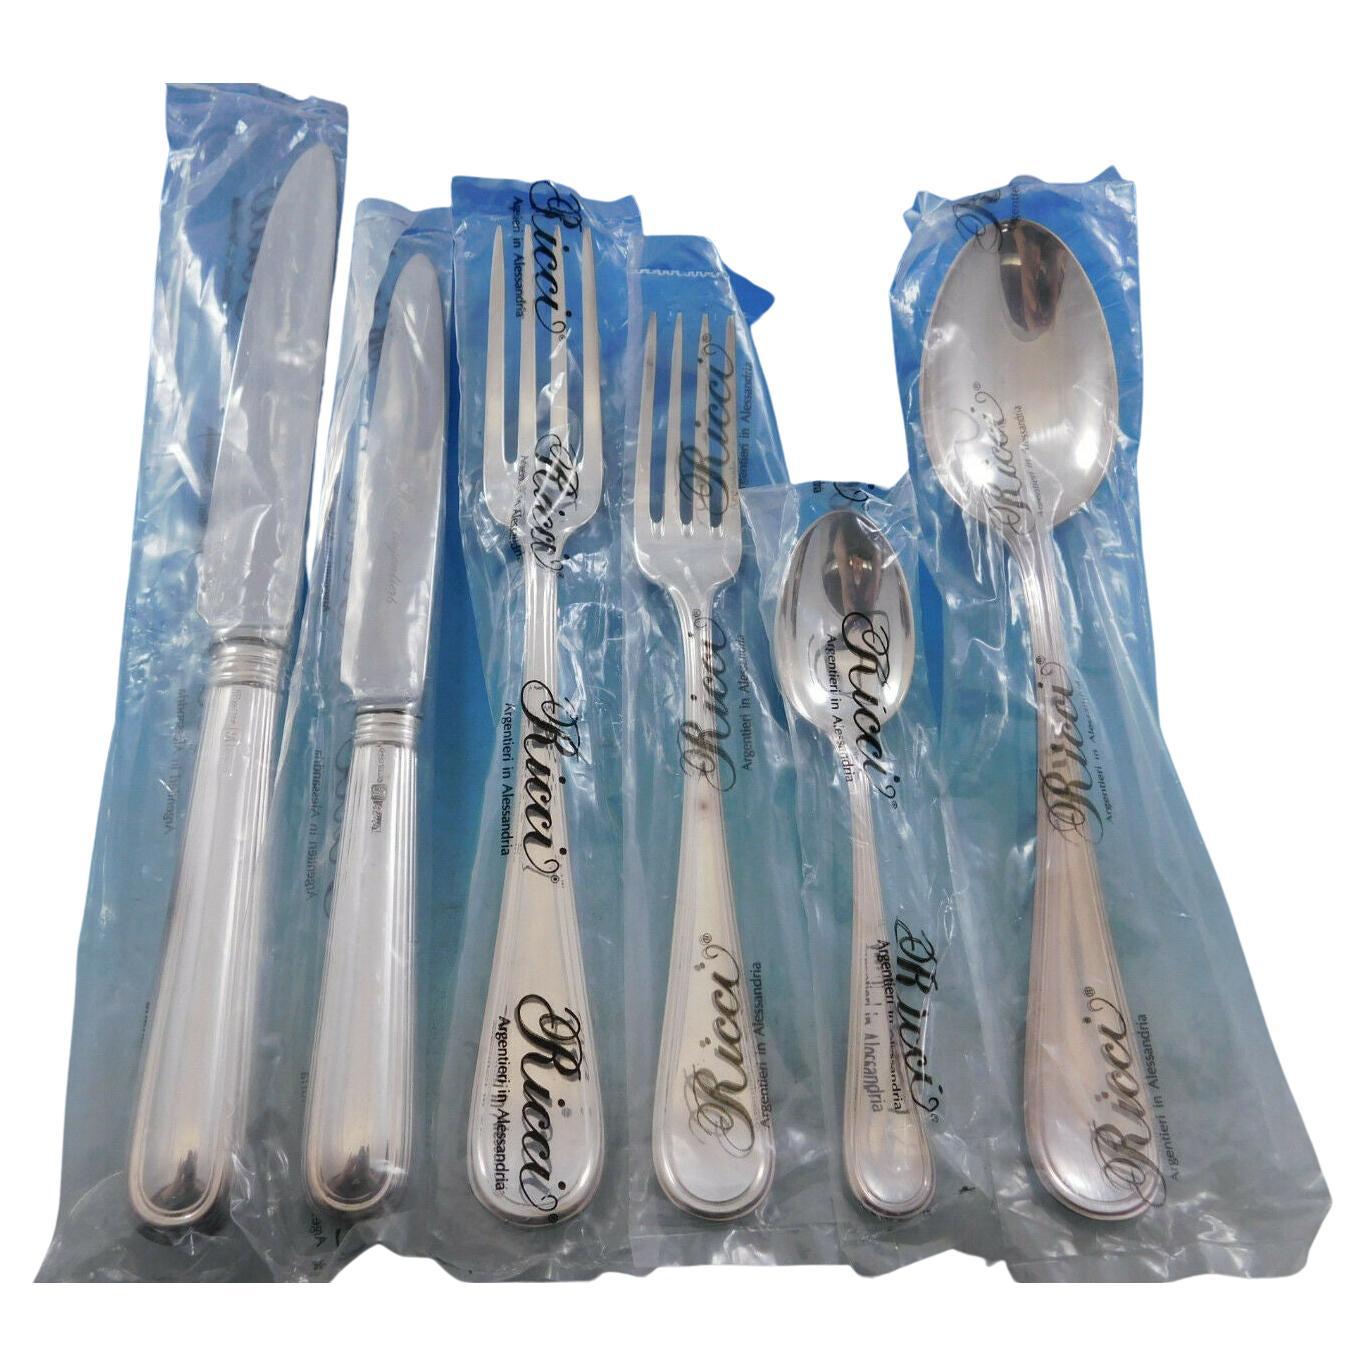 Ascot by Ricci 800 Silver Flatware Set for 12 Service 76 Pcs Dinner New Unused For Sale